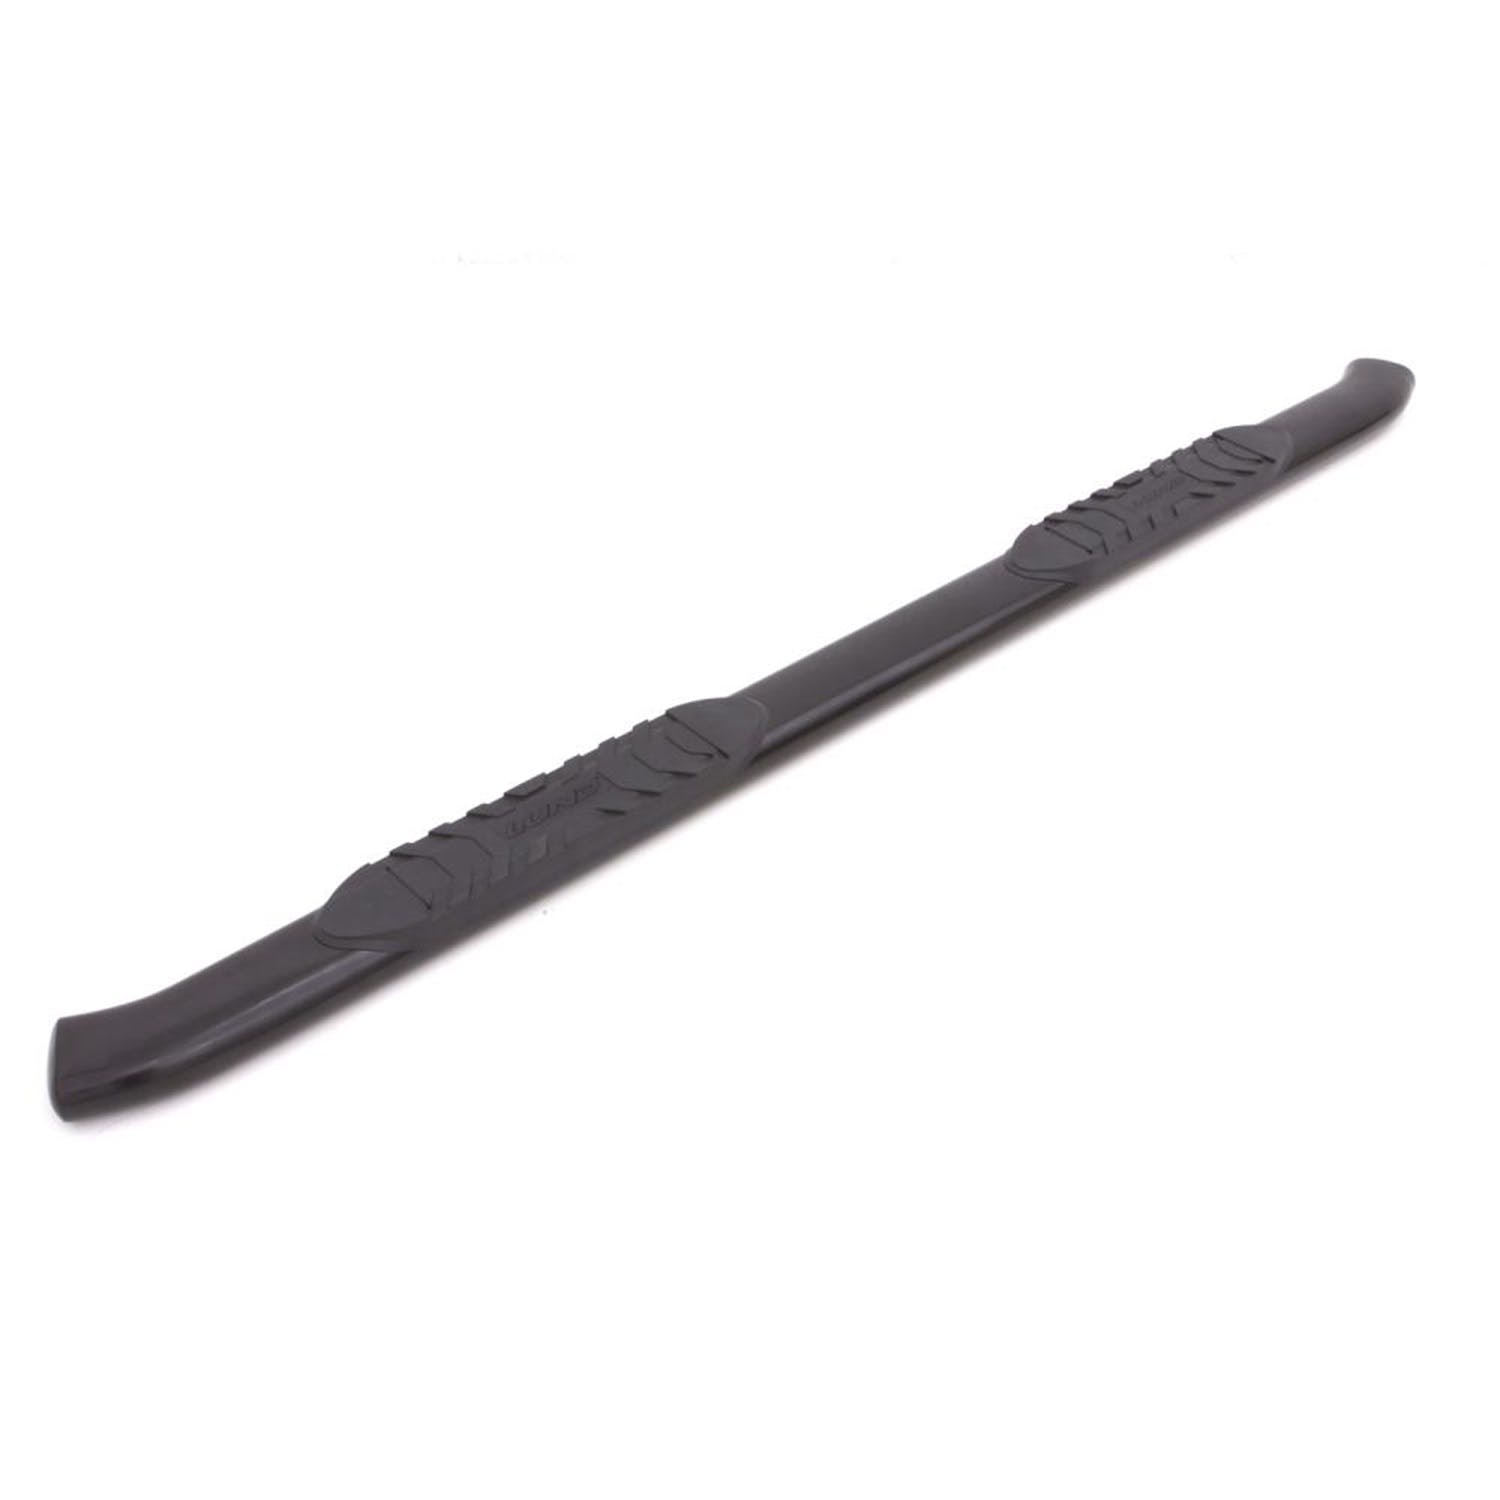 LUND 23810600 5 Inch Oval Curved Nerf Bar - Black 5 In OVAL CURVED STEEL